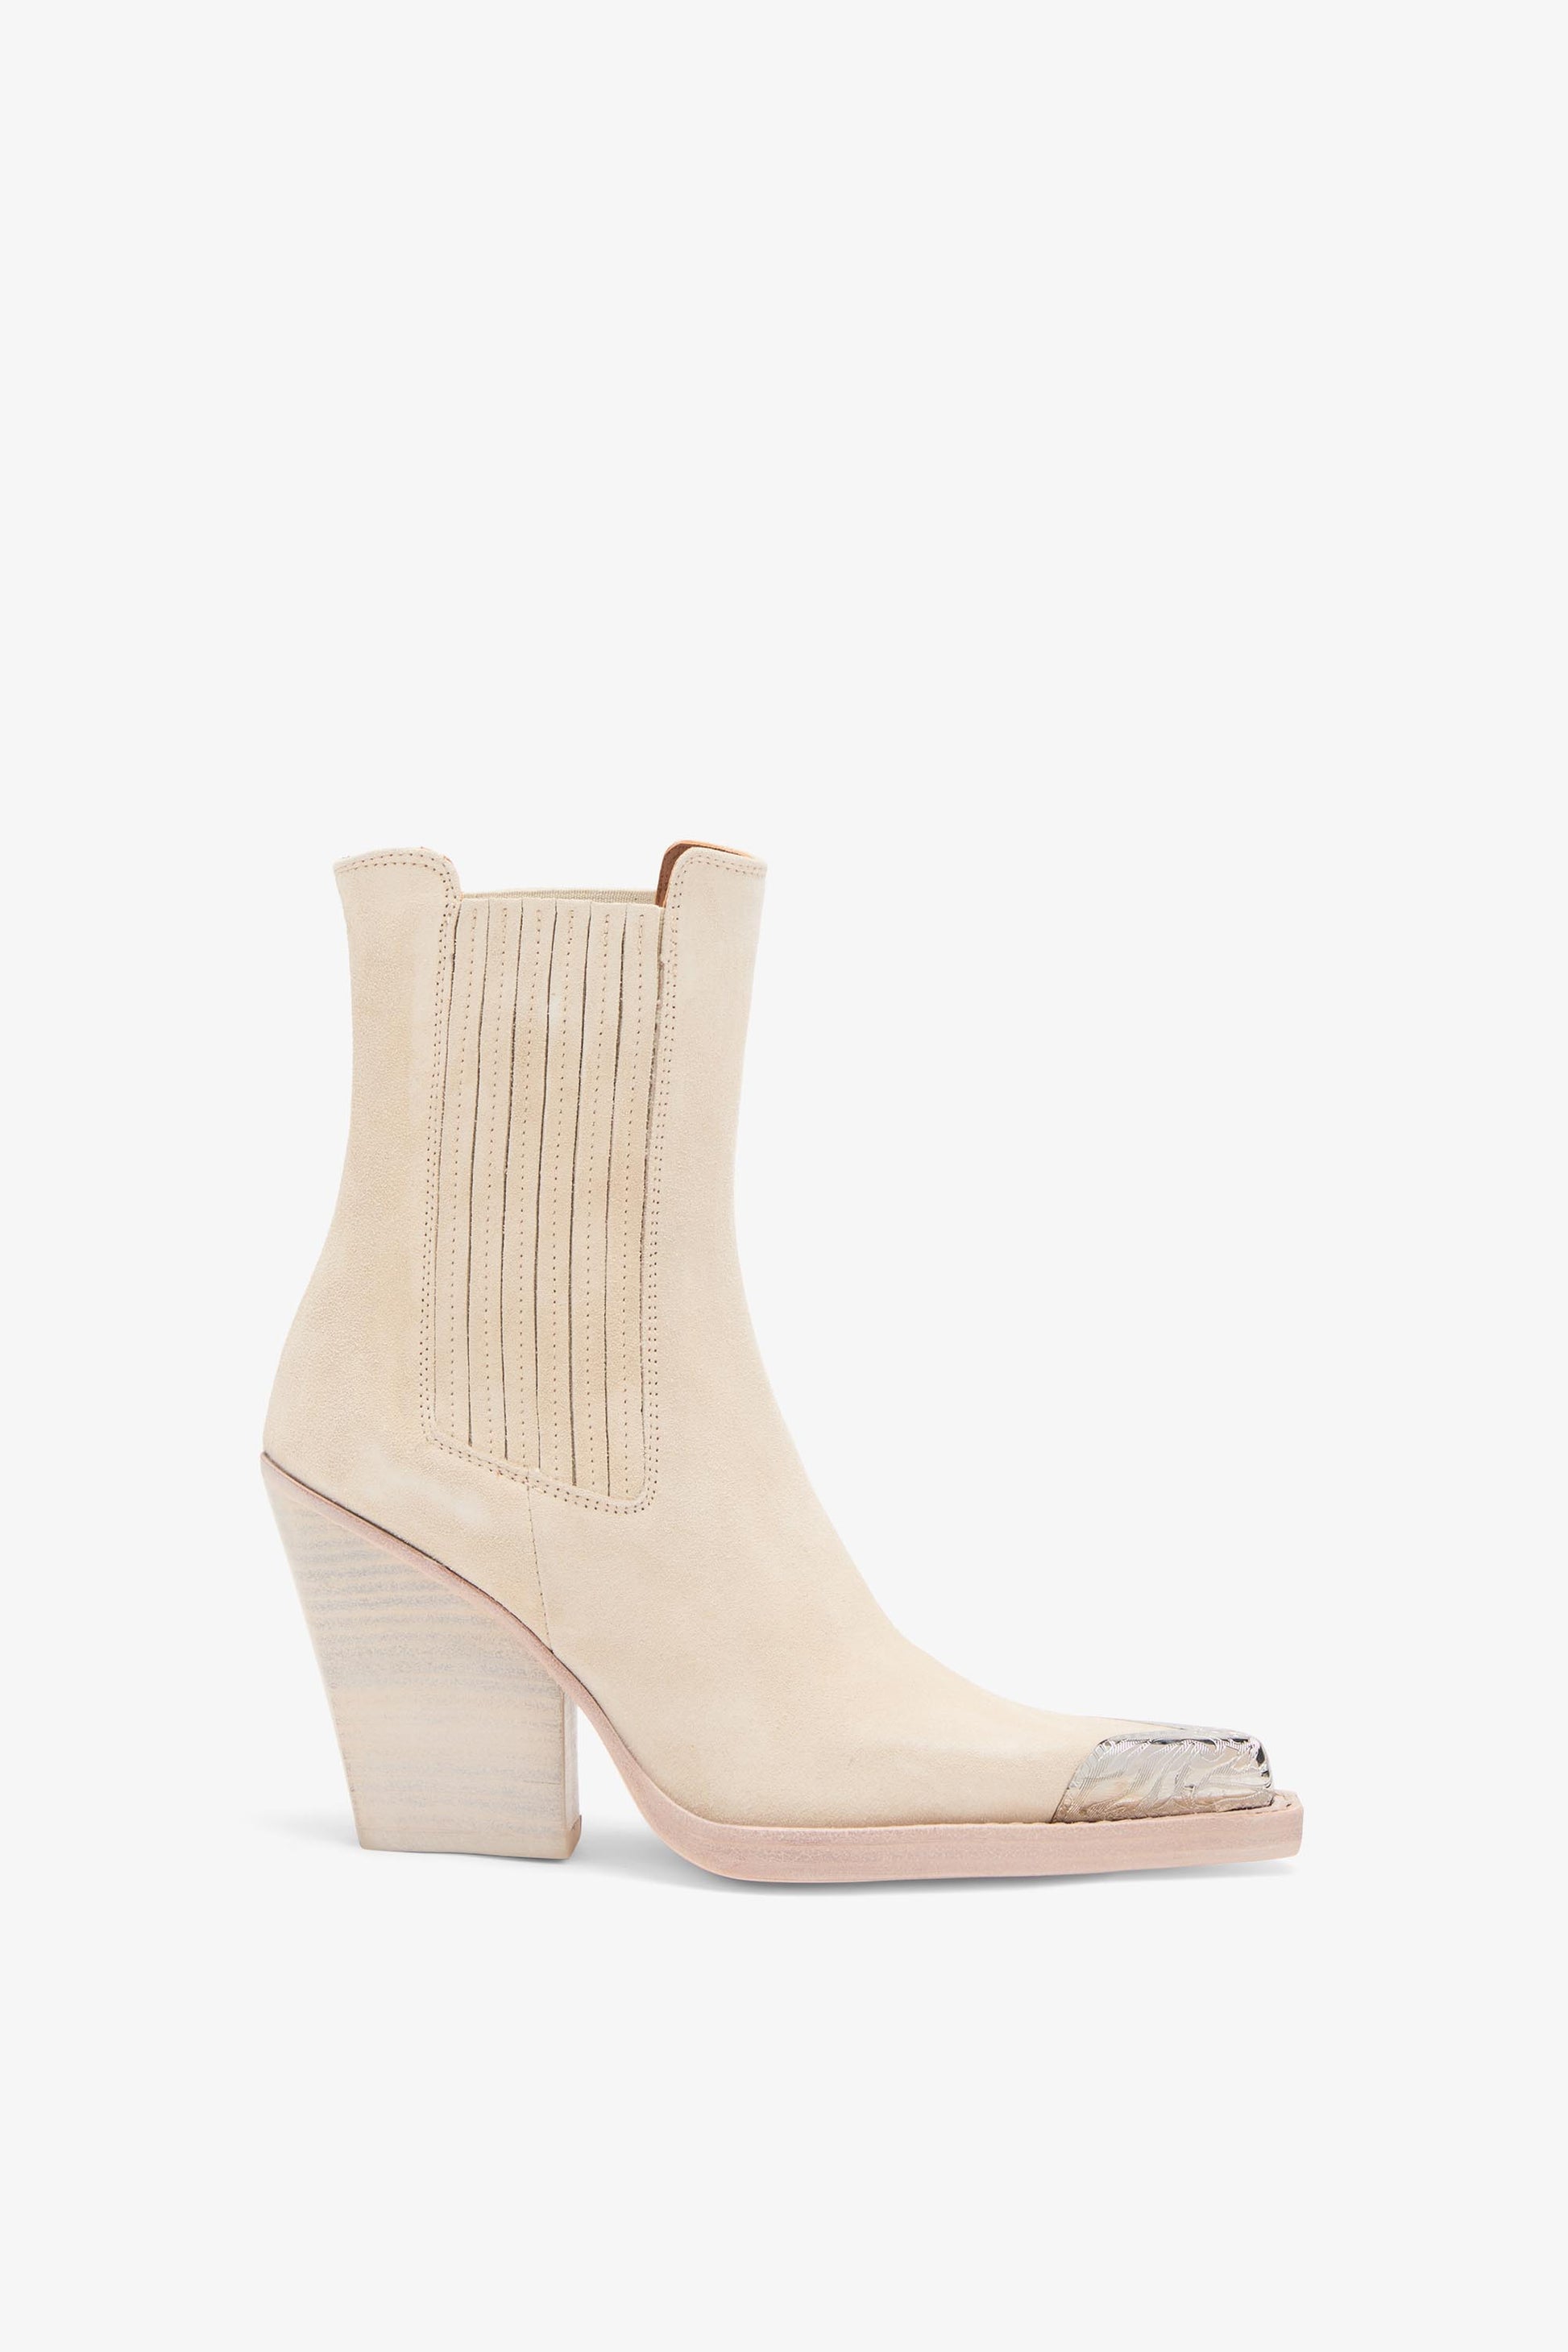 Off white calf suede ankle boots with metallic toe